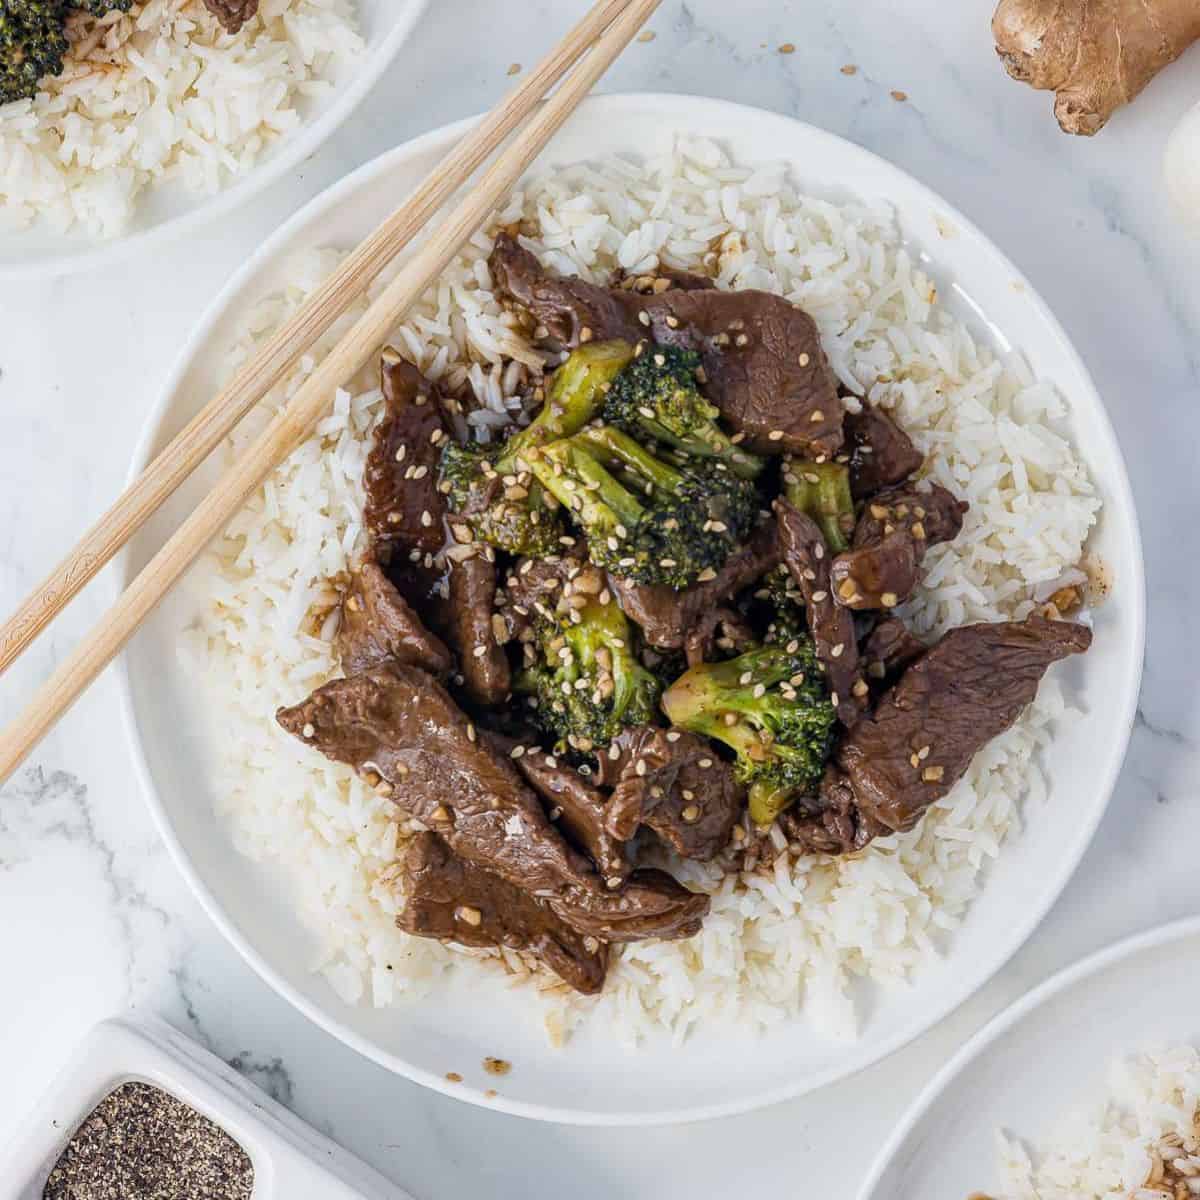 Beef and broccoli served in a bowl over white rice.